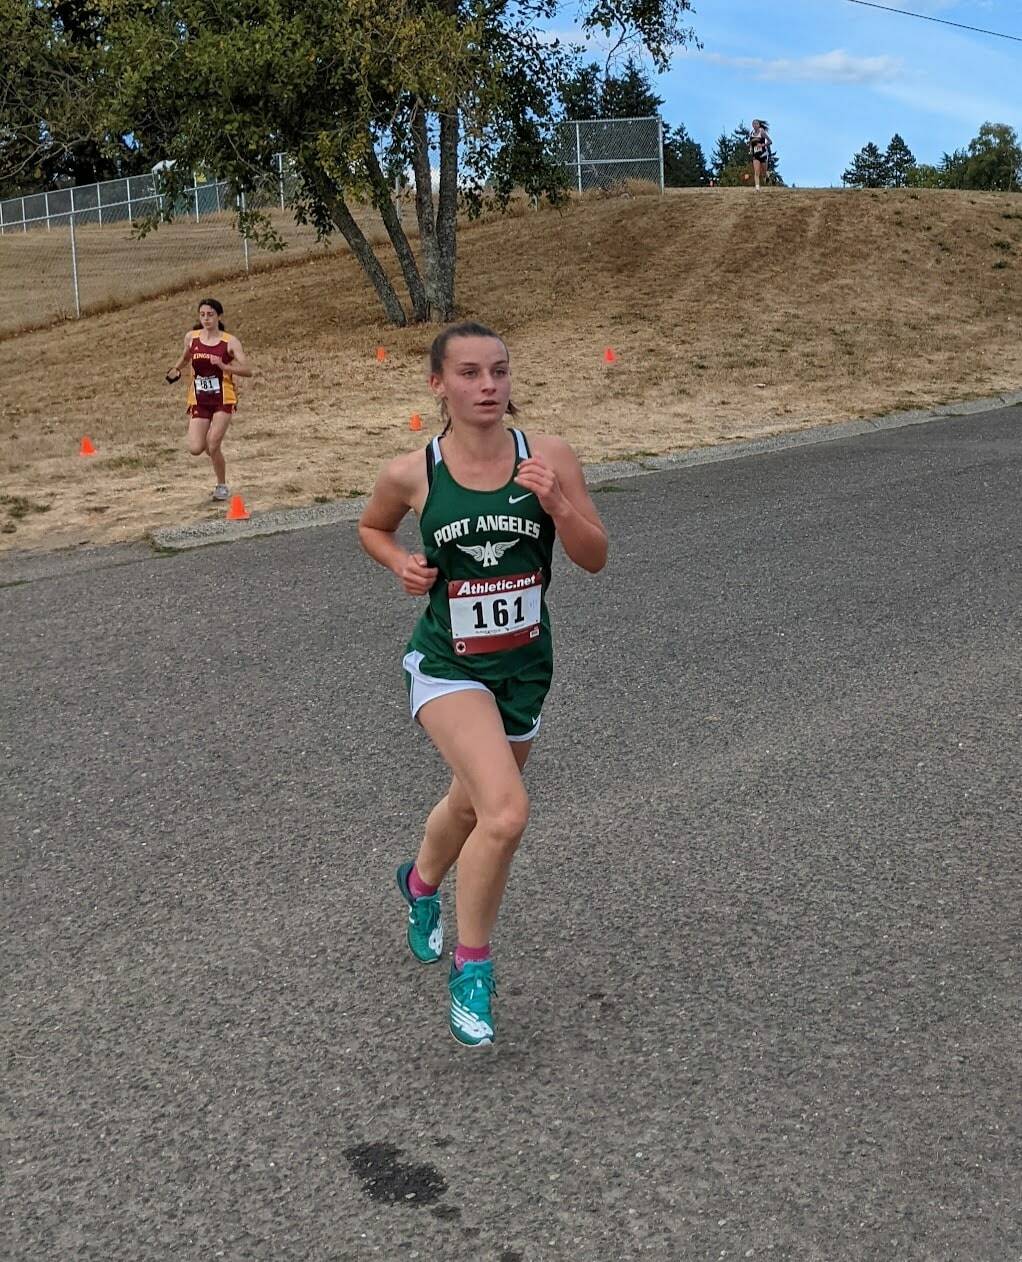 Rodger Johnson/Port Angeles Cross Country
Port Angeles freshman Zakara Braun was the Roughriders' top girls finisher in a meet held in Bremerton on Wednesday.